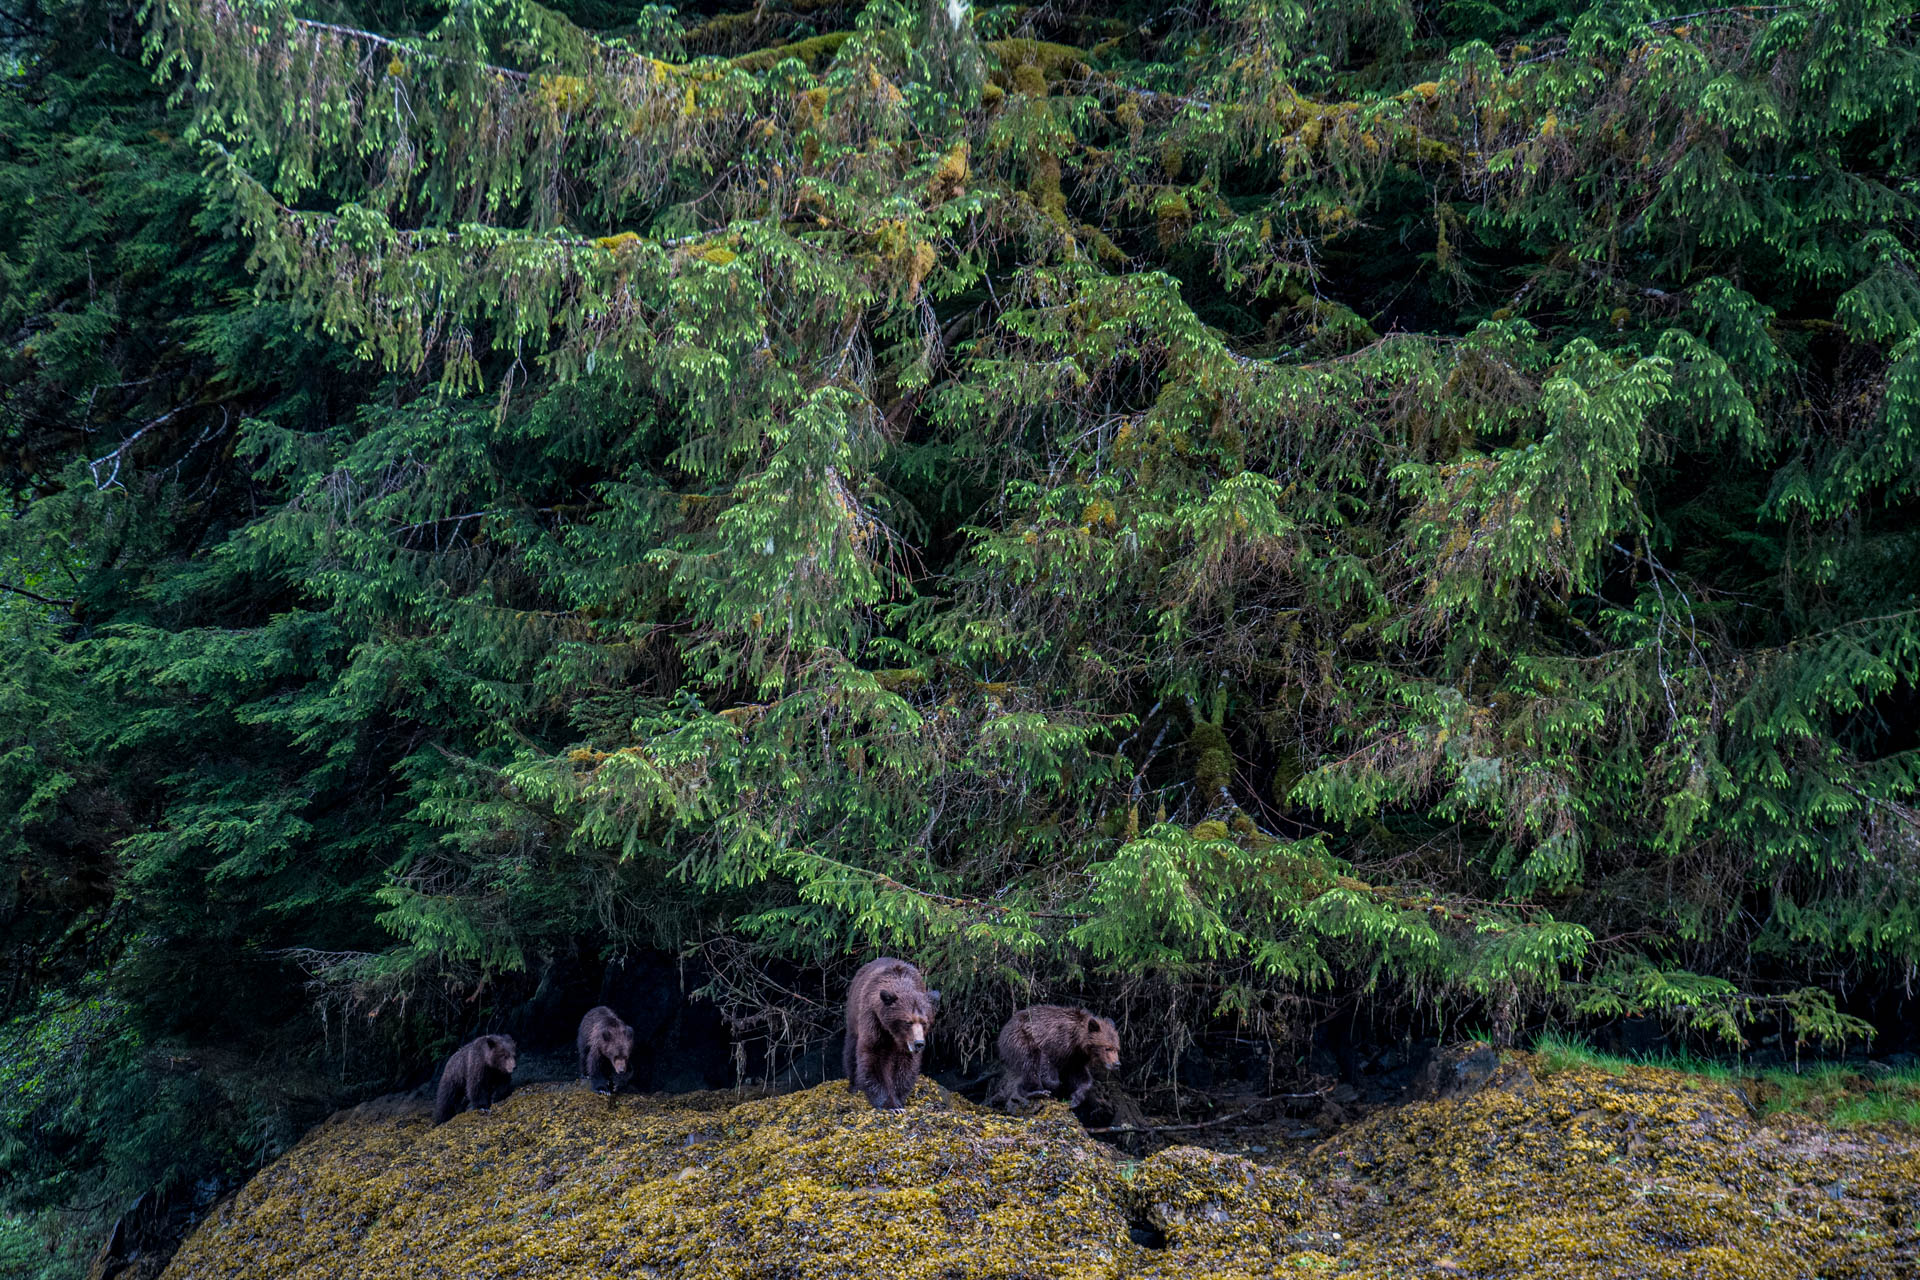 A sow Grizzly Bear, Ursus arctos, and her cubs emerge from the forest in Khutzeymateen Provincial Park, or the Khutzeymateen Grizzly Bear Sanctuary.